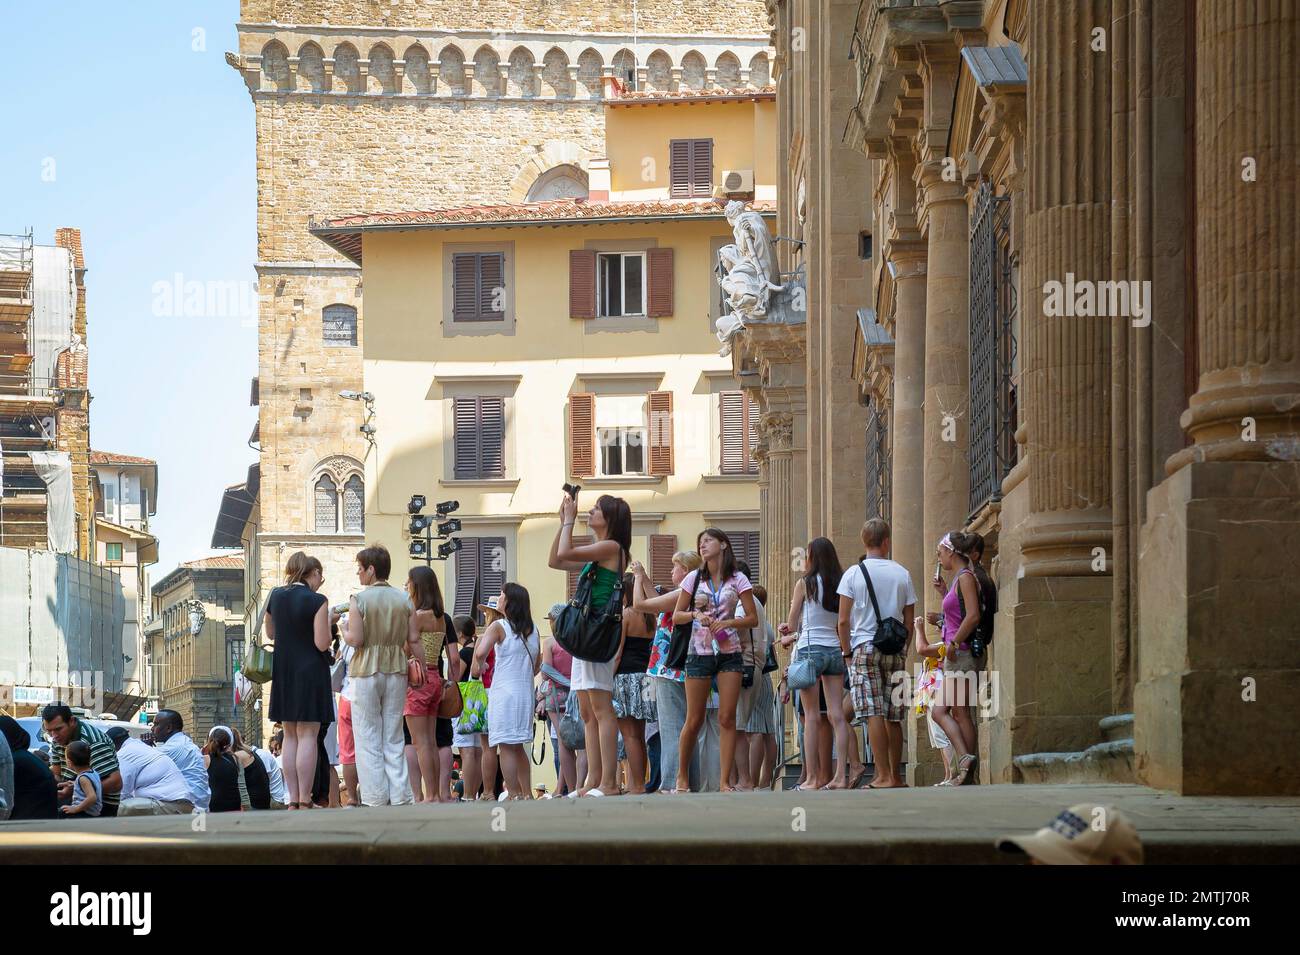 Europe tourism, view in summer of tourists standing in the Piazza San Firenze in the historic renaissance era center of the city of Florence, Italy Stock Photo